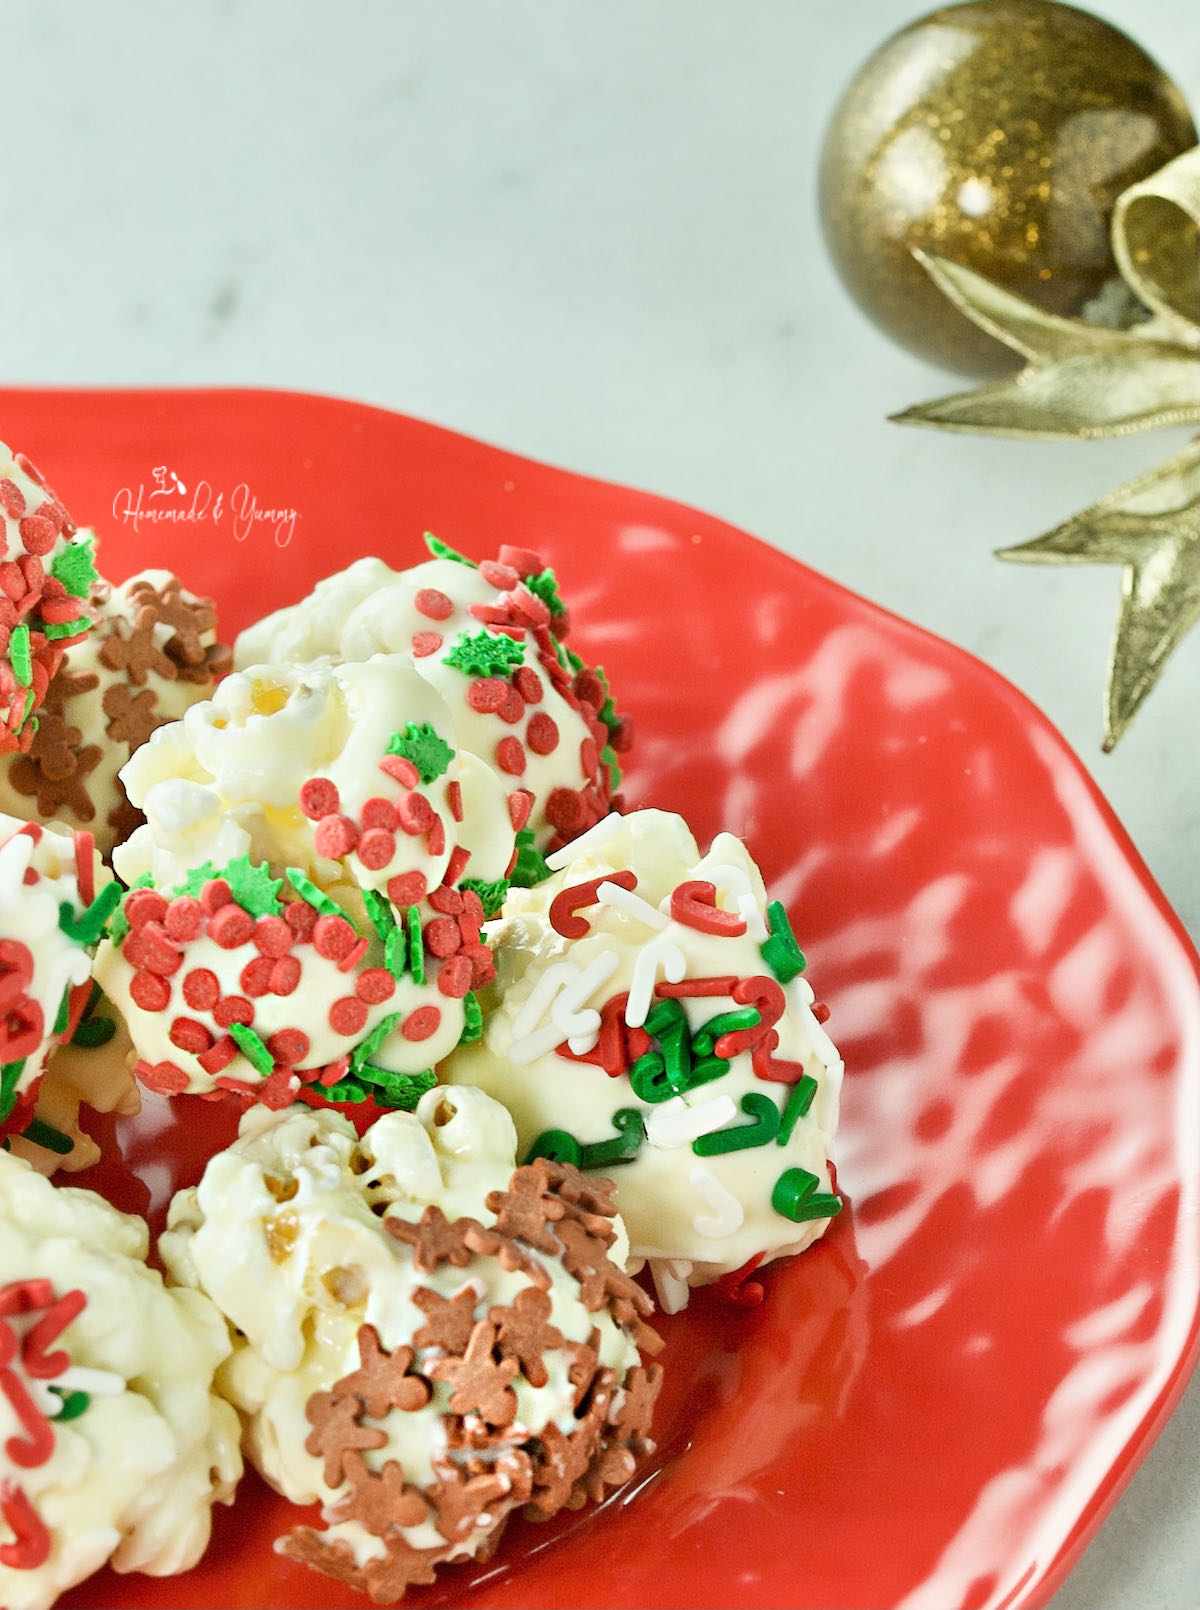 A plate of white chocolate covered popcorn balls for the holidays.